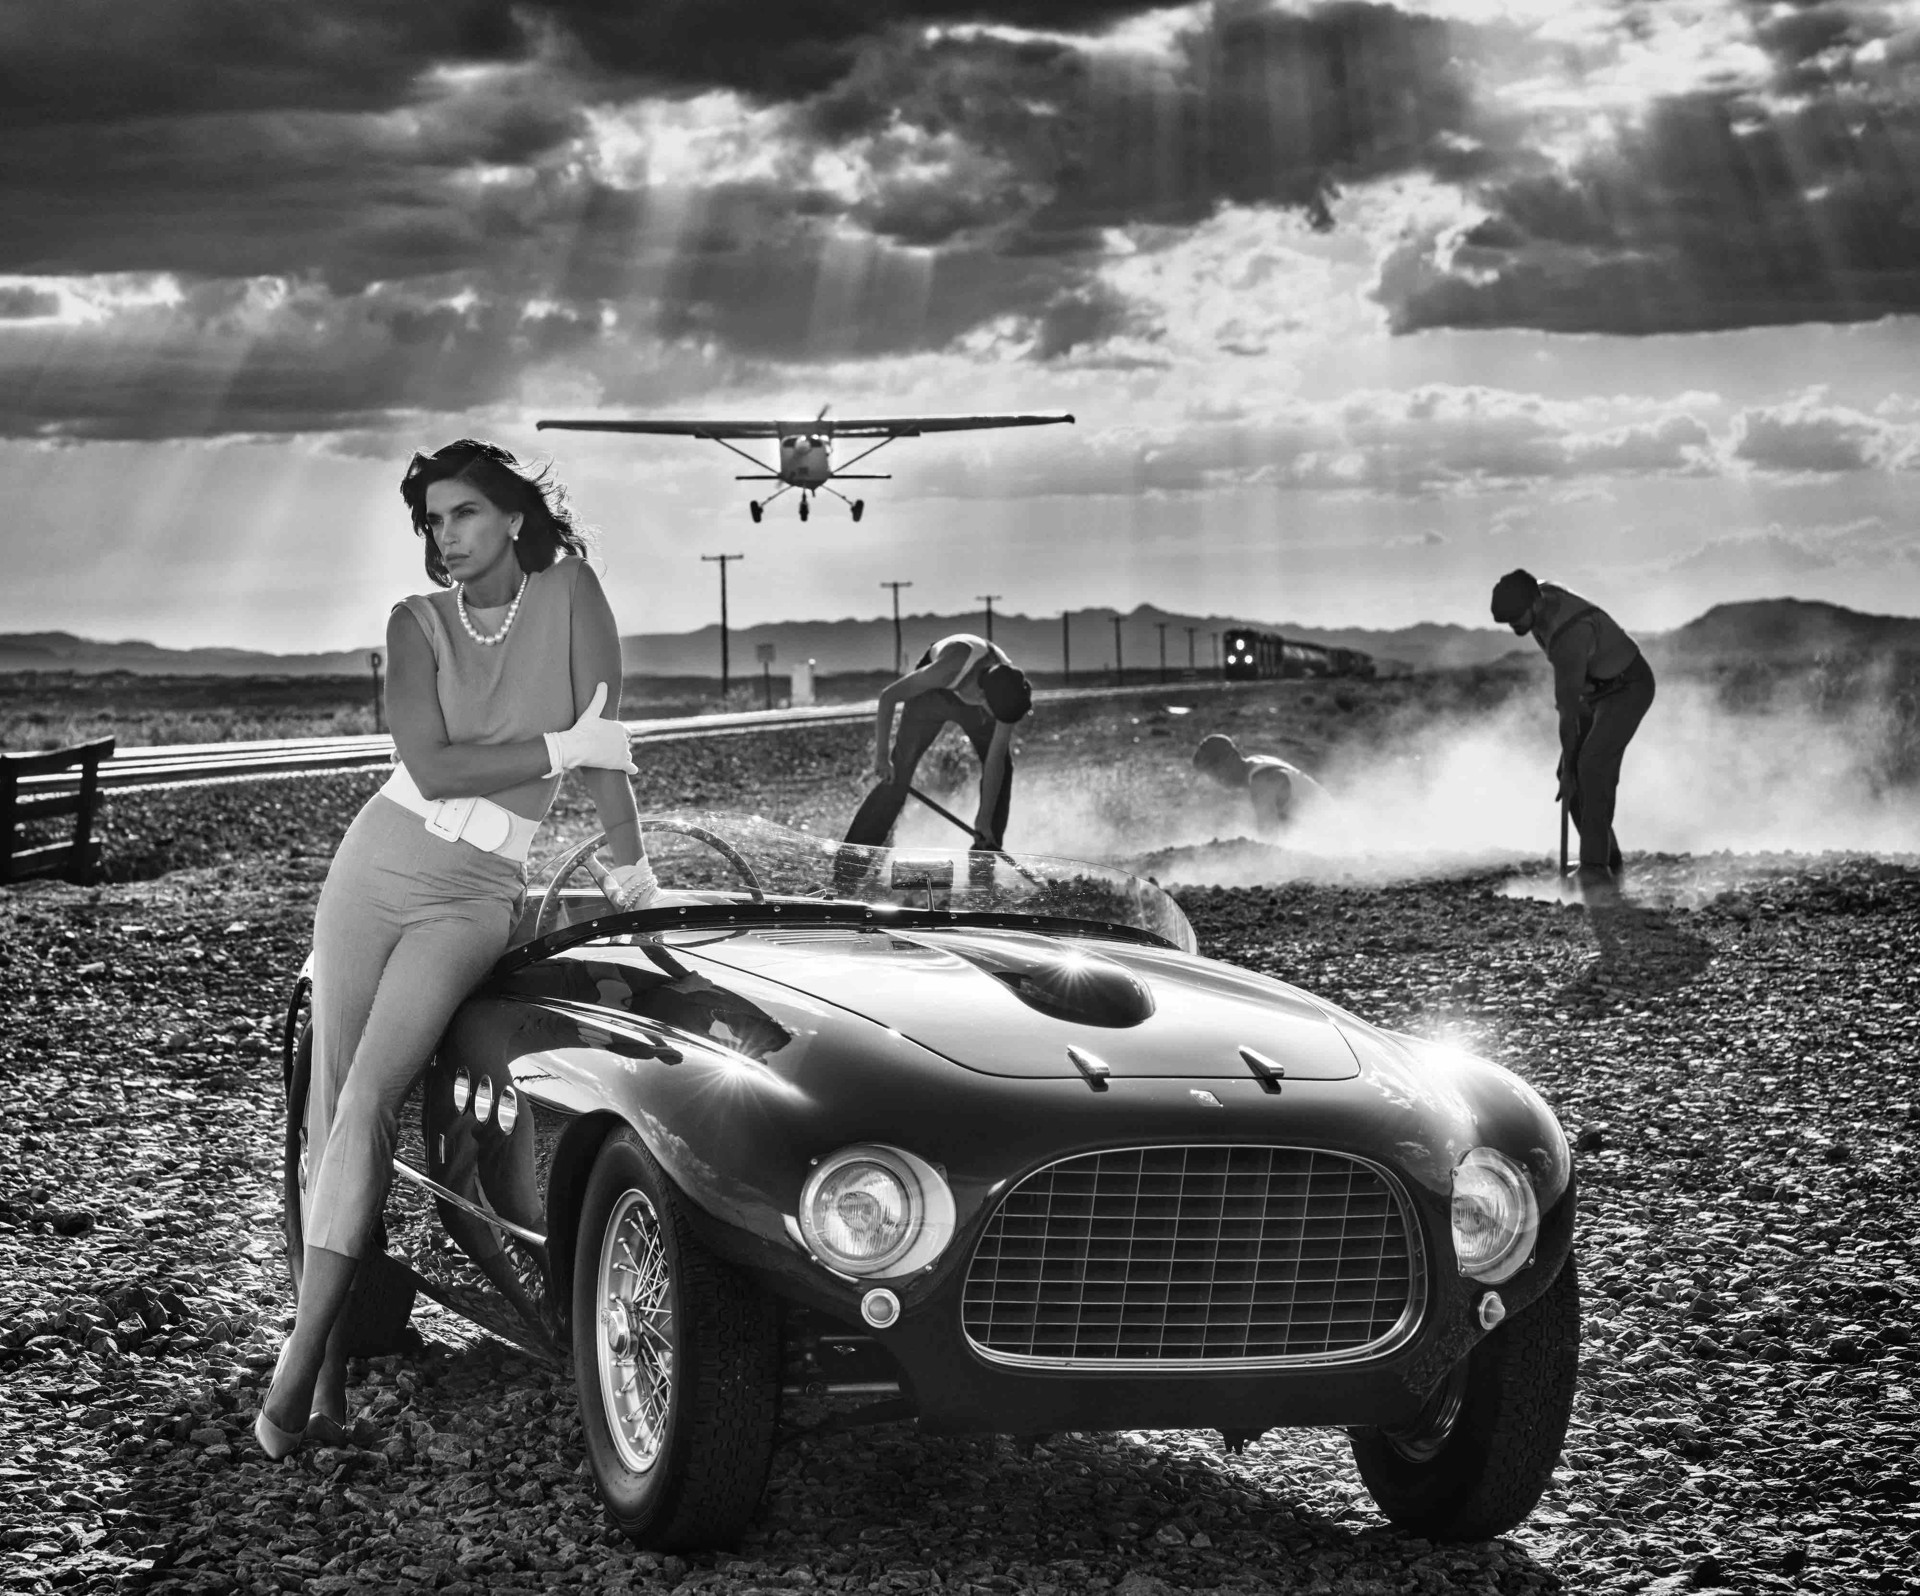 Planes, Trains, and Automobiles by David Yarrow